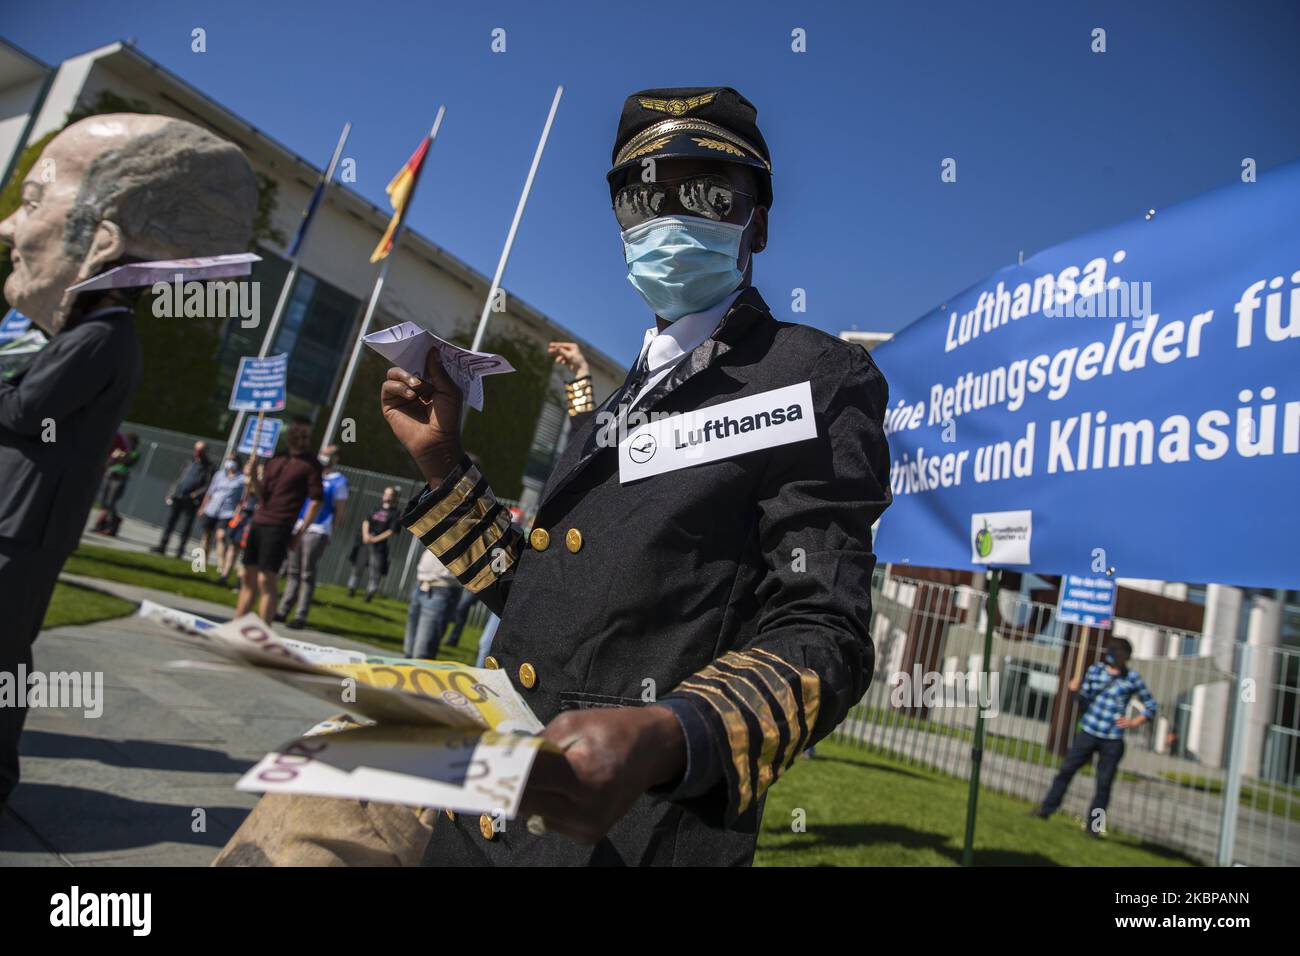 An activist dressed as an airline stewardess holds up oversized fake versions of Euro currency at a protest outside the Chancellery against the recent Lufthansa bailout during the coronavirus crisis on May 27, 2020 in Berlin, Germany. (Photo by Emmanuele Contini/NurPhoto) Stock Photo